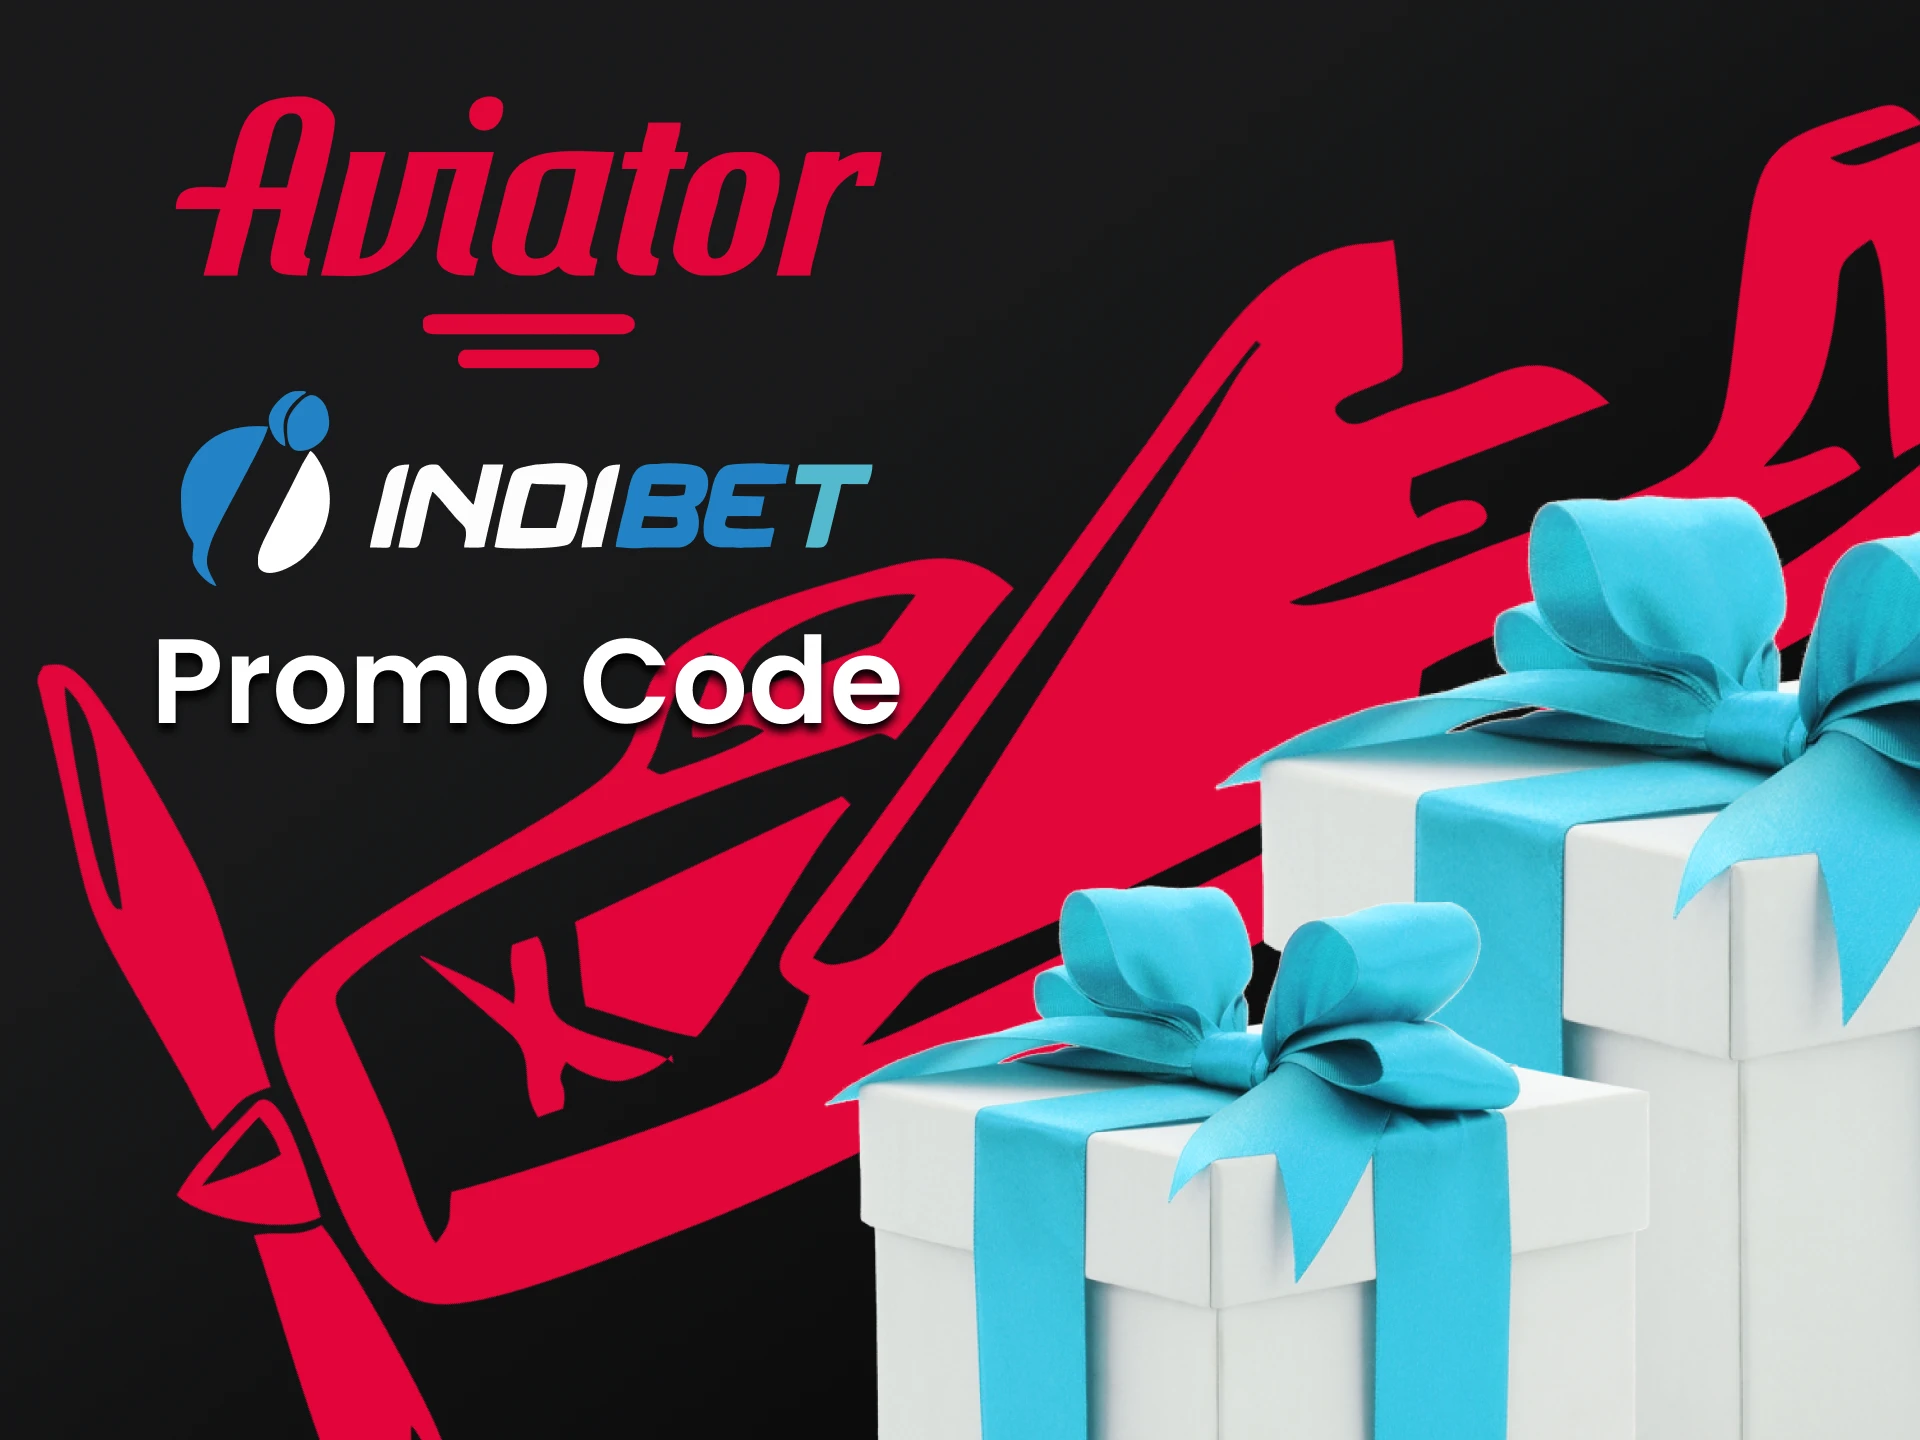 Indibet is giving away a promo code for the Aviator game.